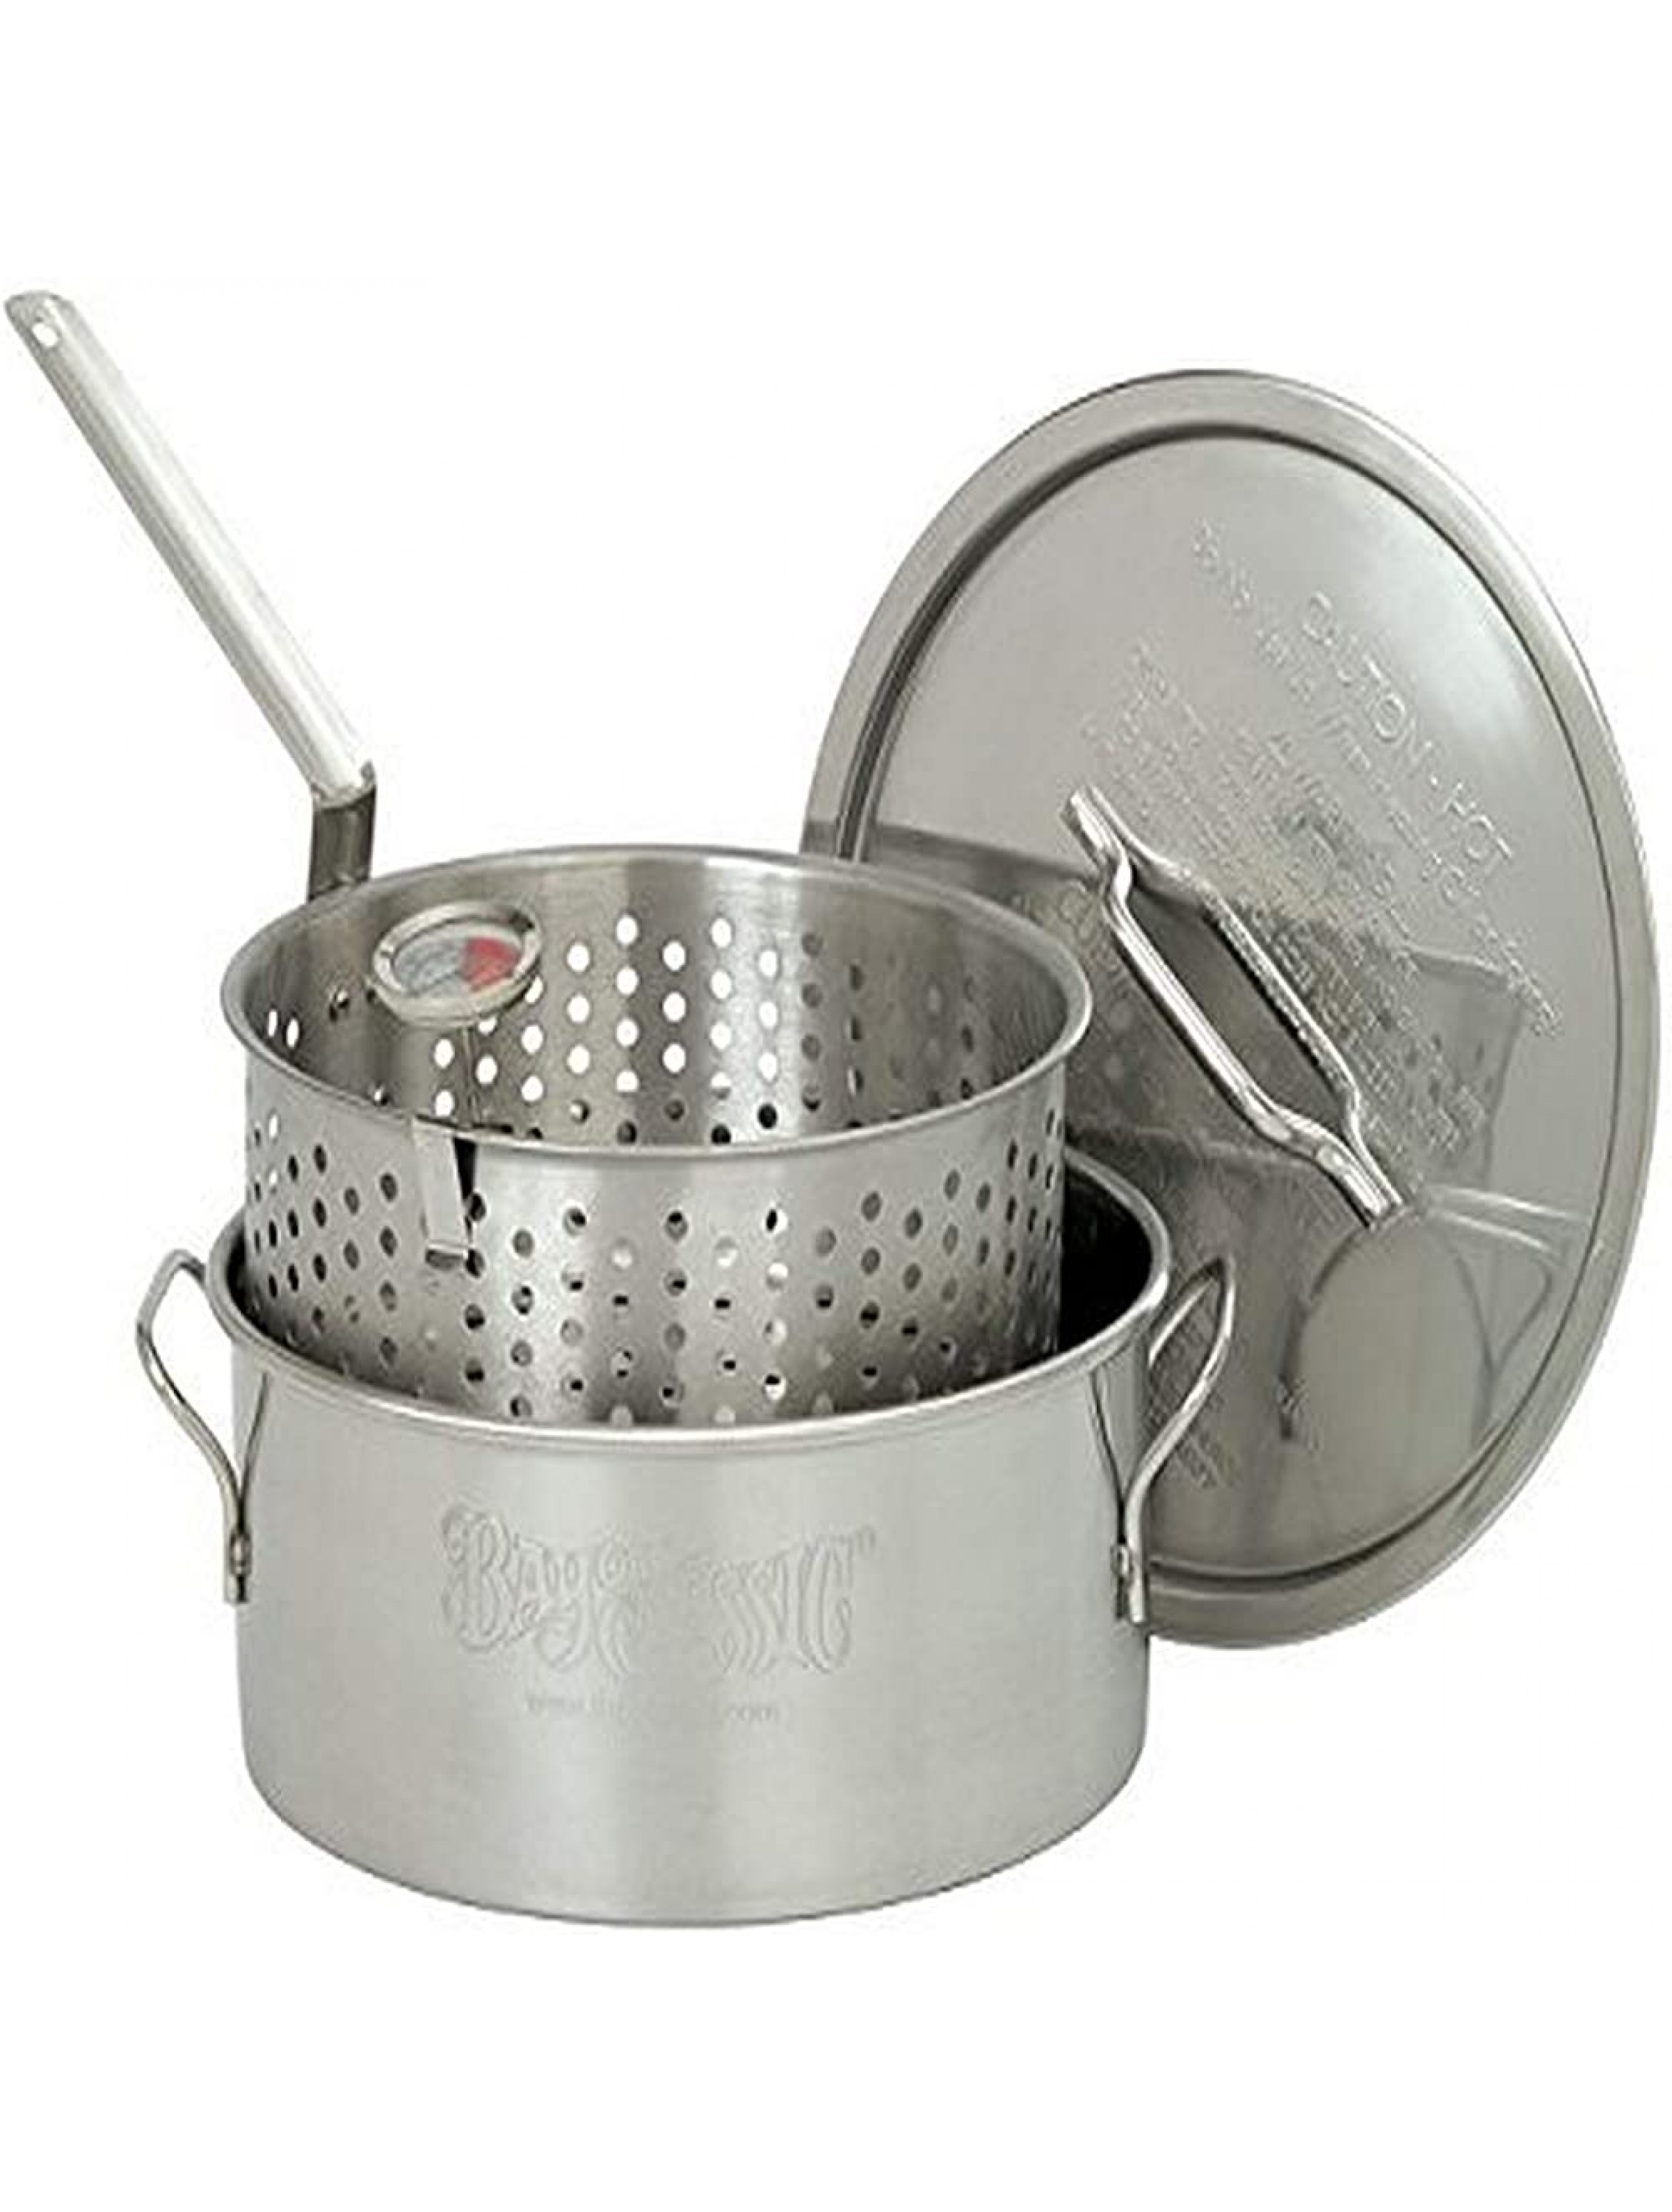 Bayou Classic 1101 10-Quart Stainless-Steel Fry Pot with Lid and Basket,Silver - B5S0I4GNM